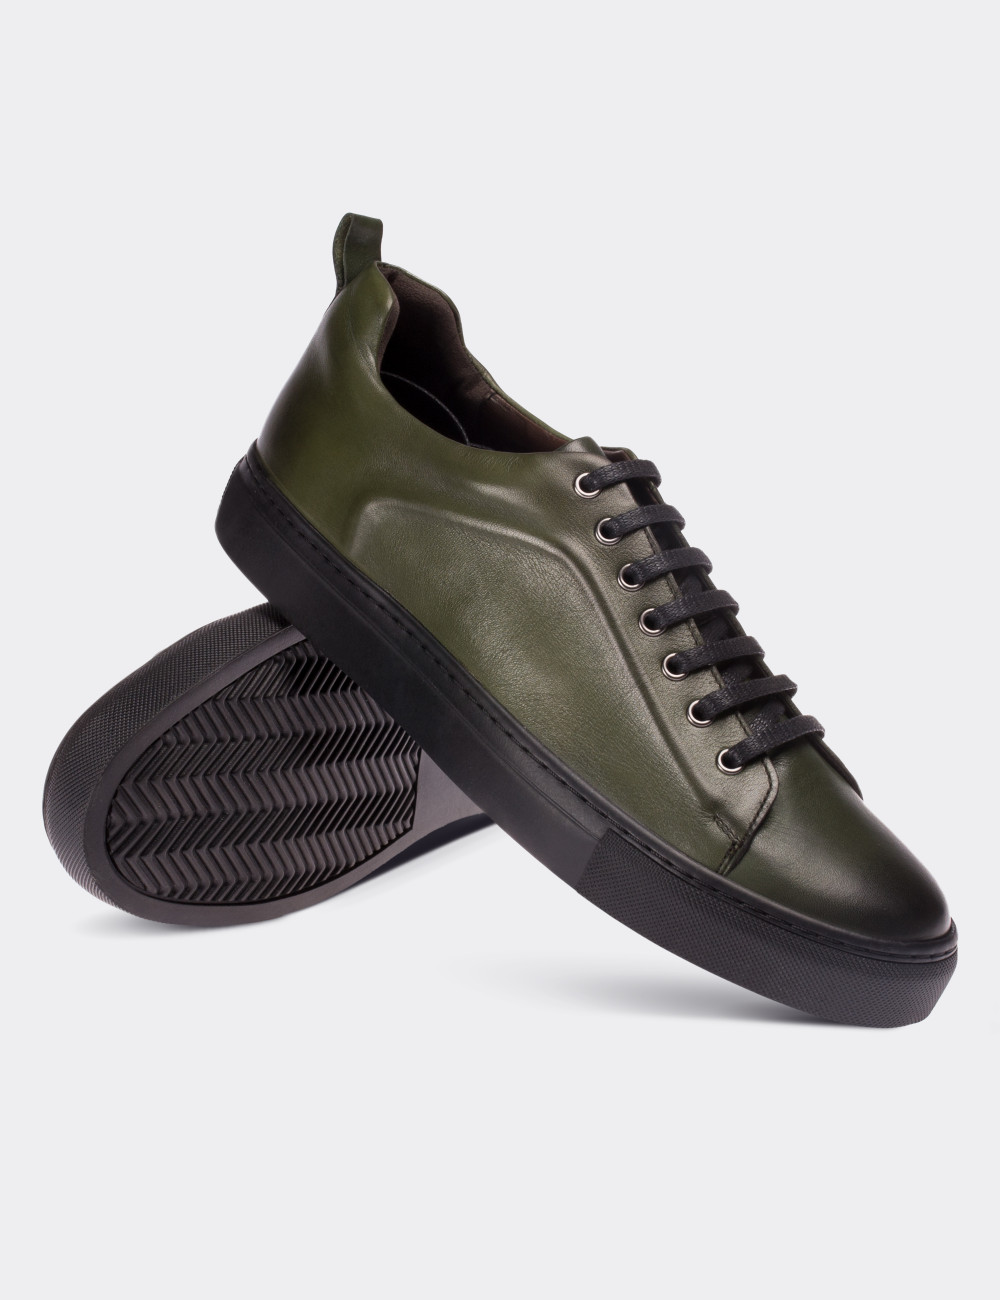 Green  Leather Sneakers - 01669MYSLC01